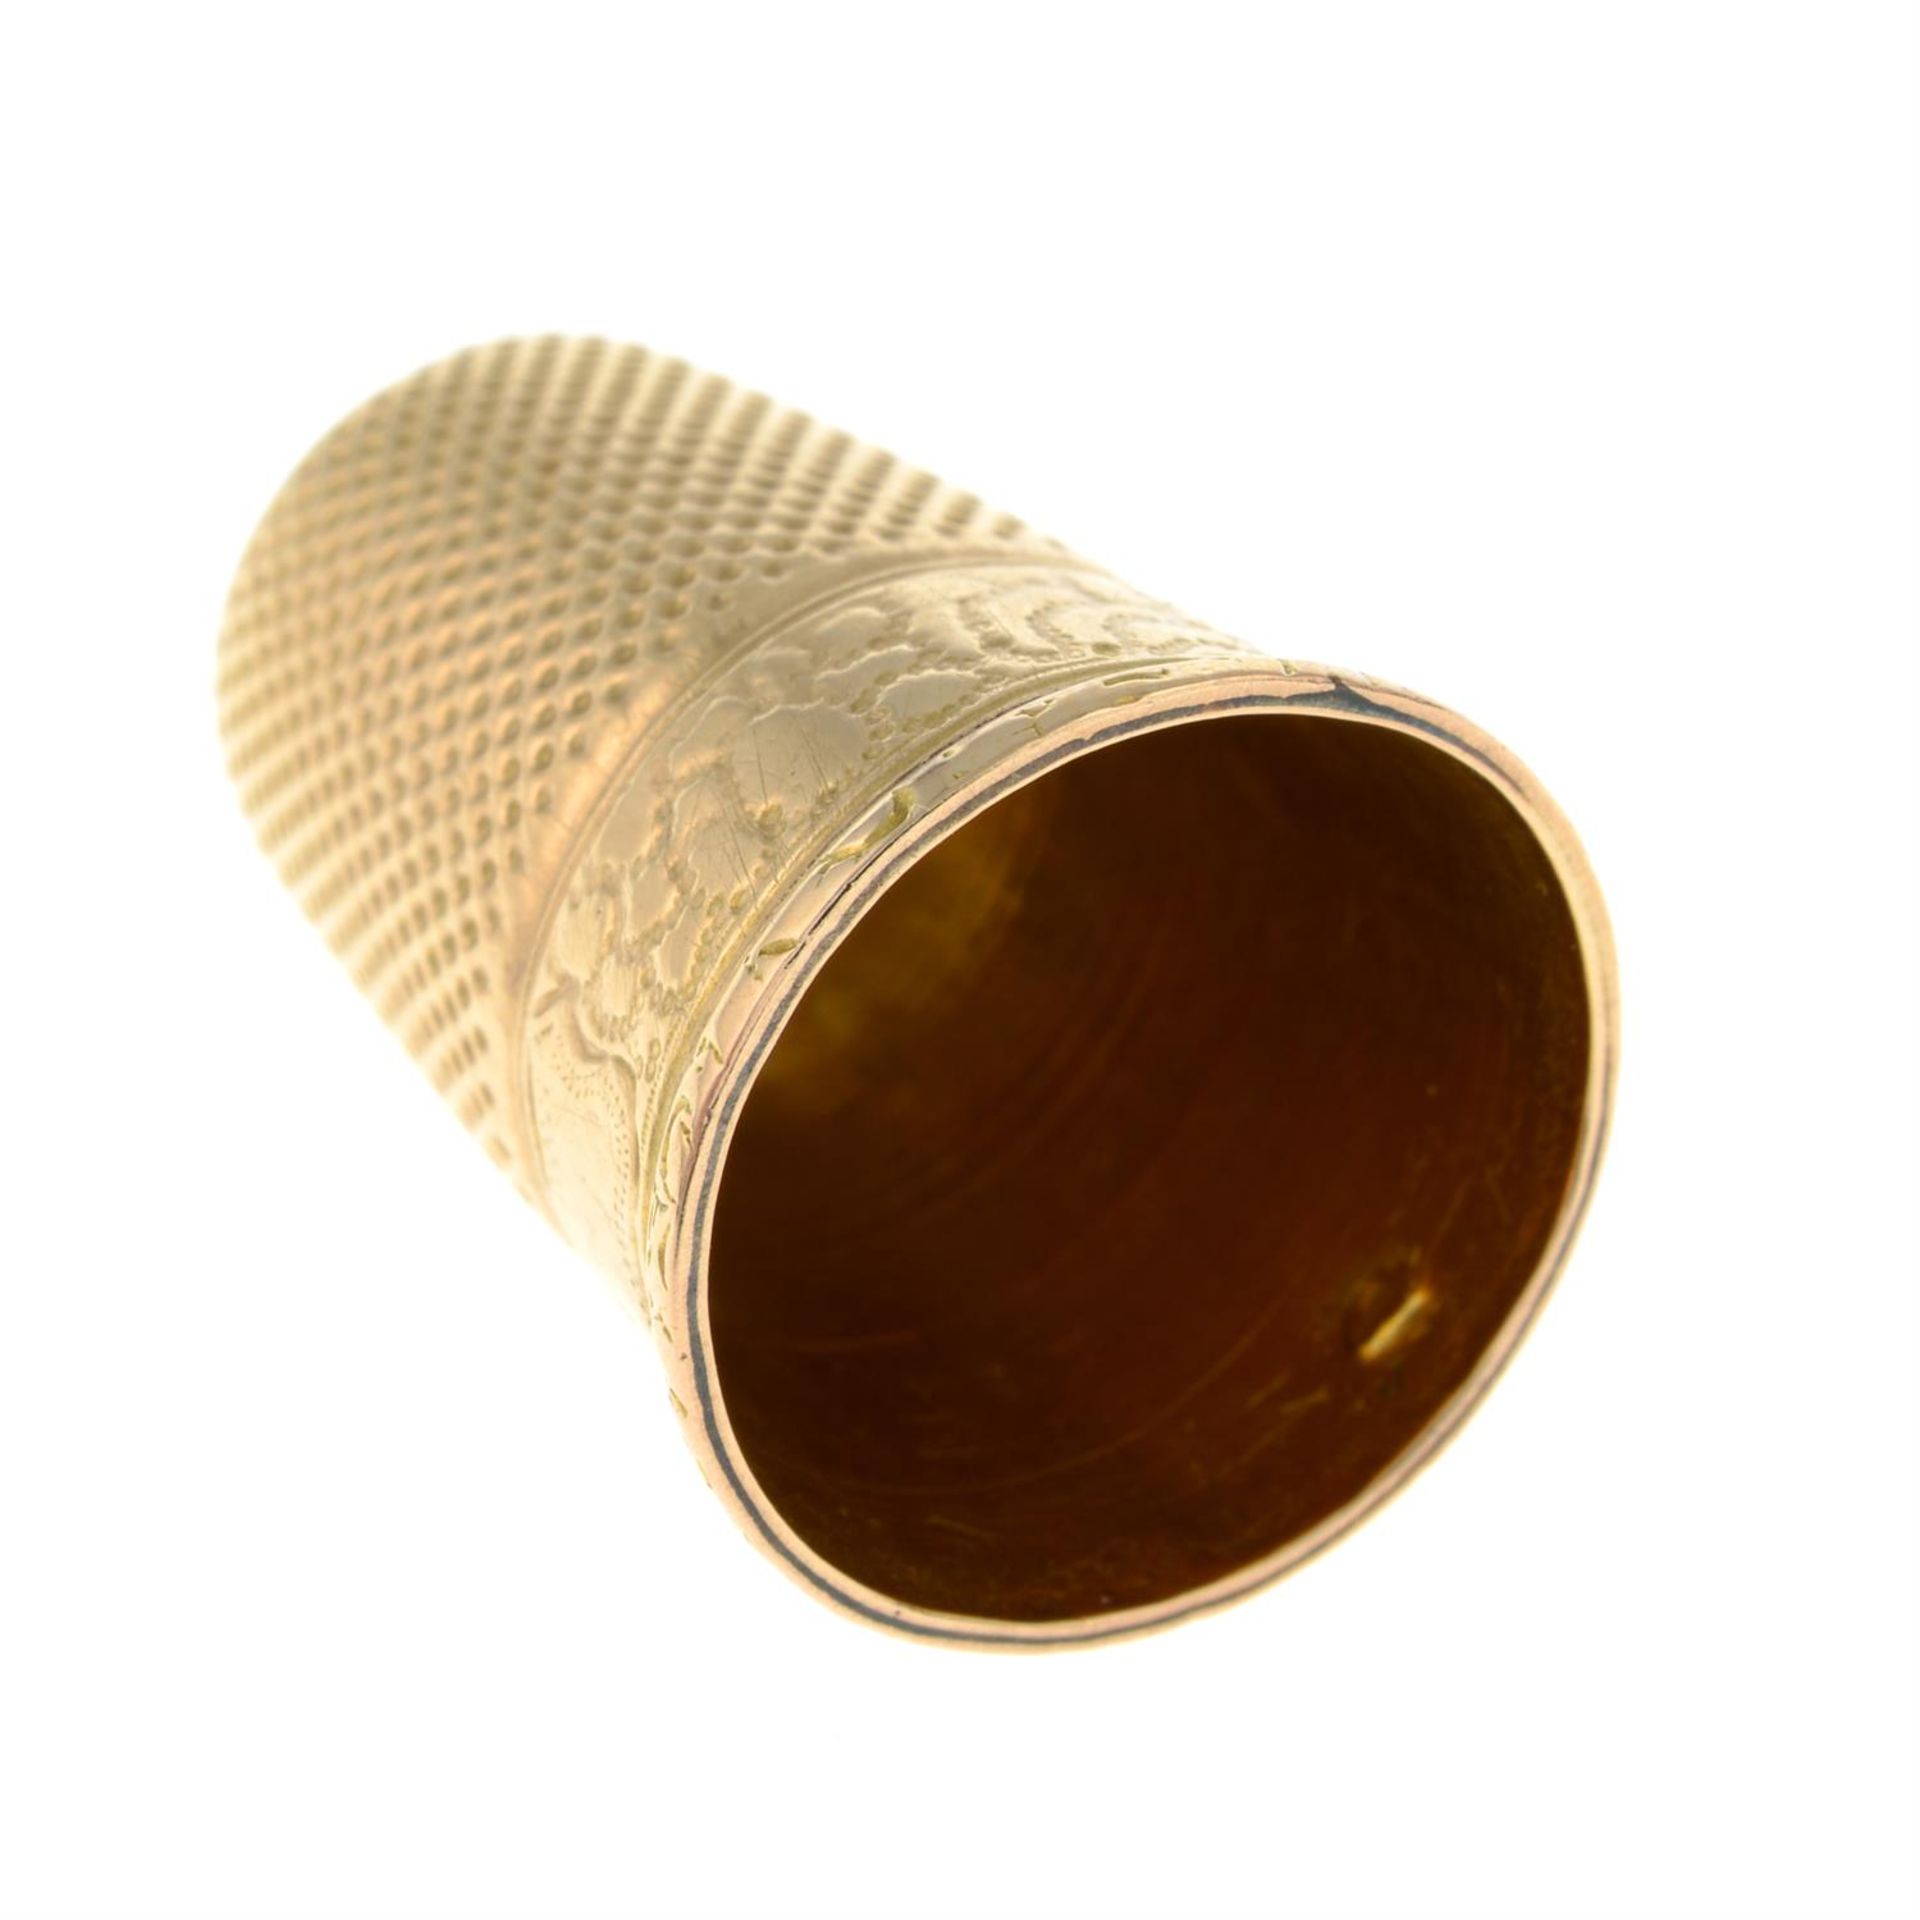 Early 20th century gold thimble. - Image 2 of 3